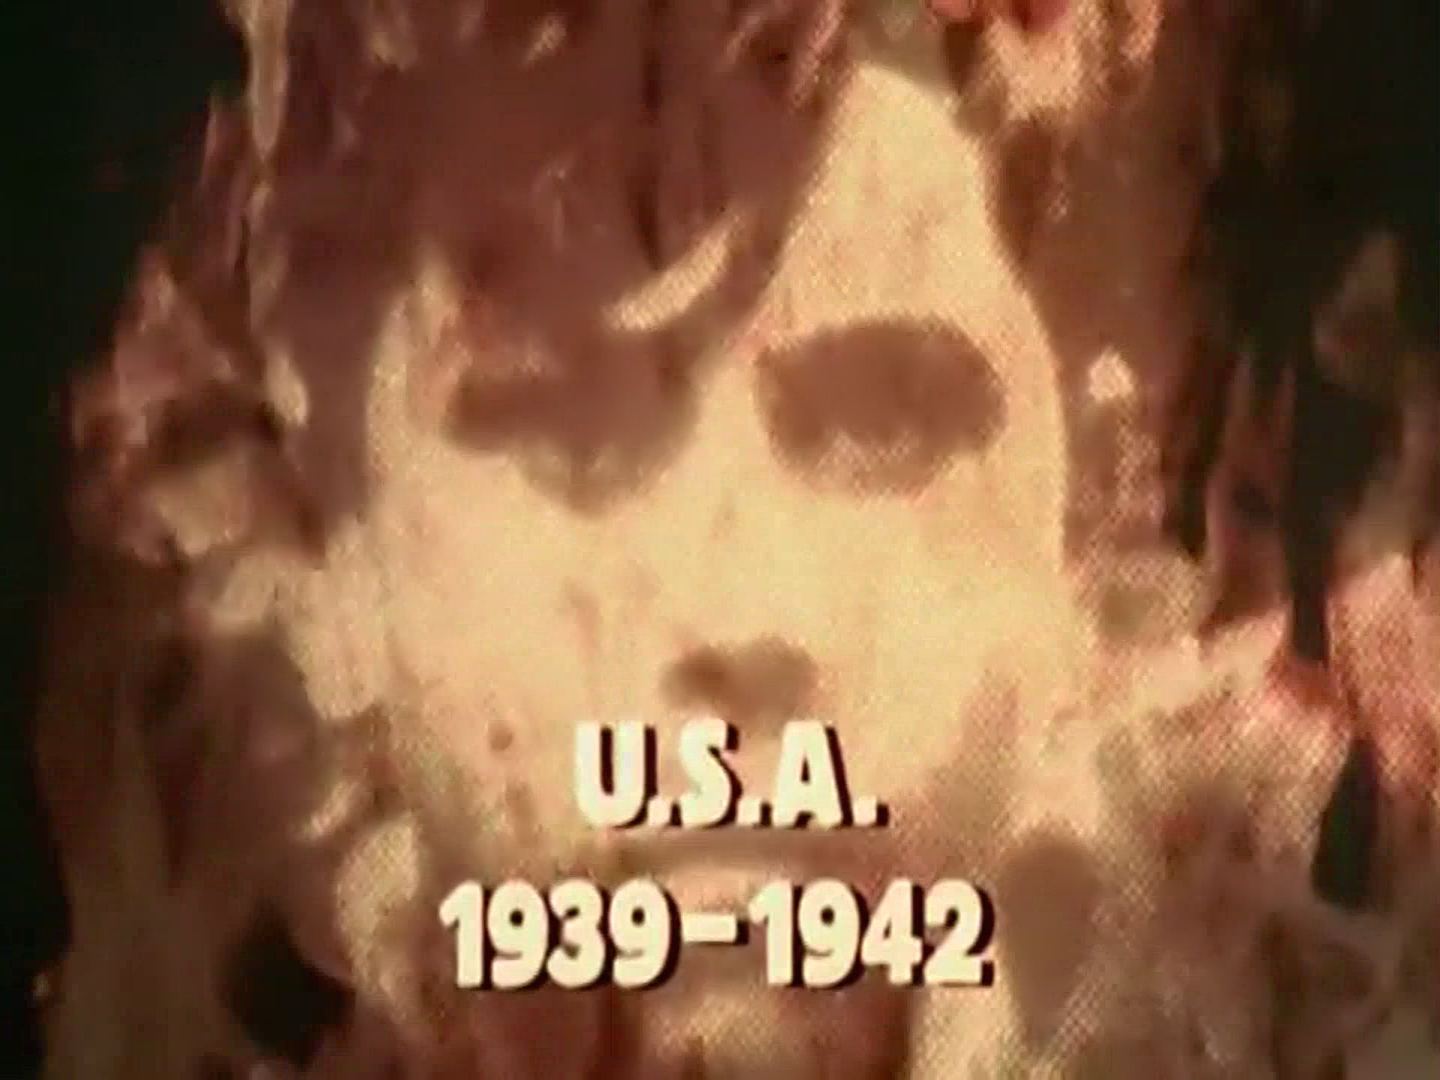 Main title from the 1973 ‘On Our Way’ episode of The World at War (1973-74) (2). USA 1939-1942